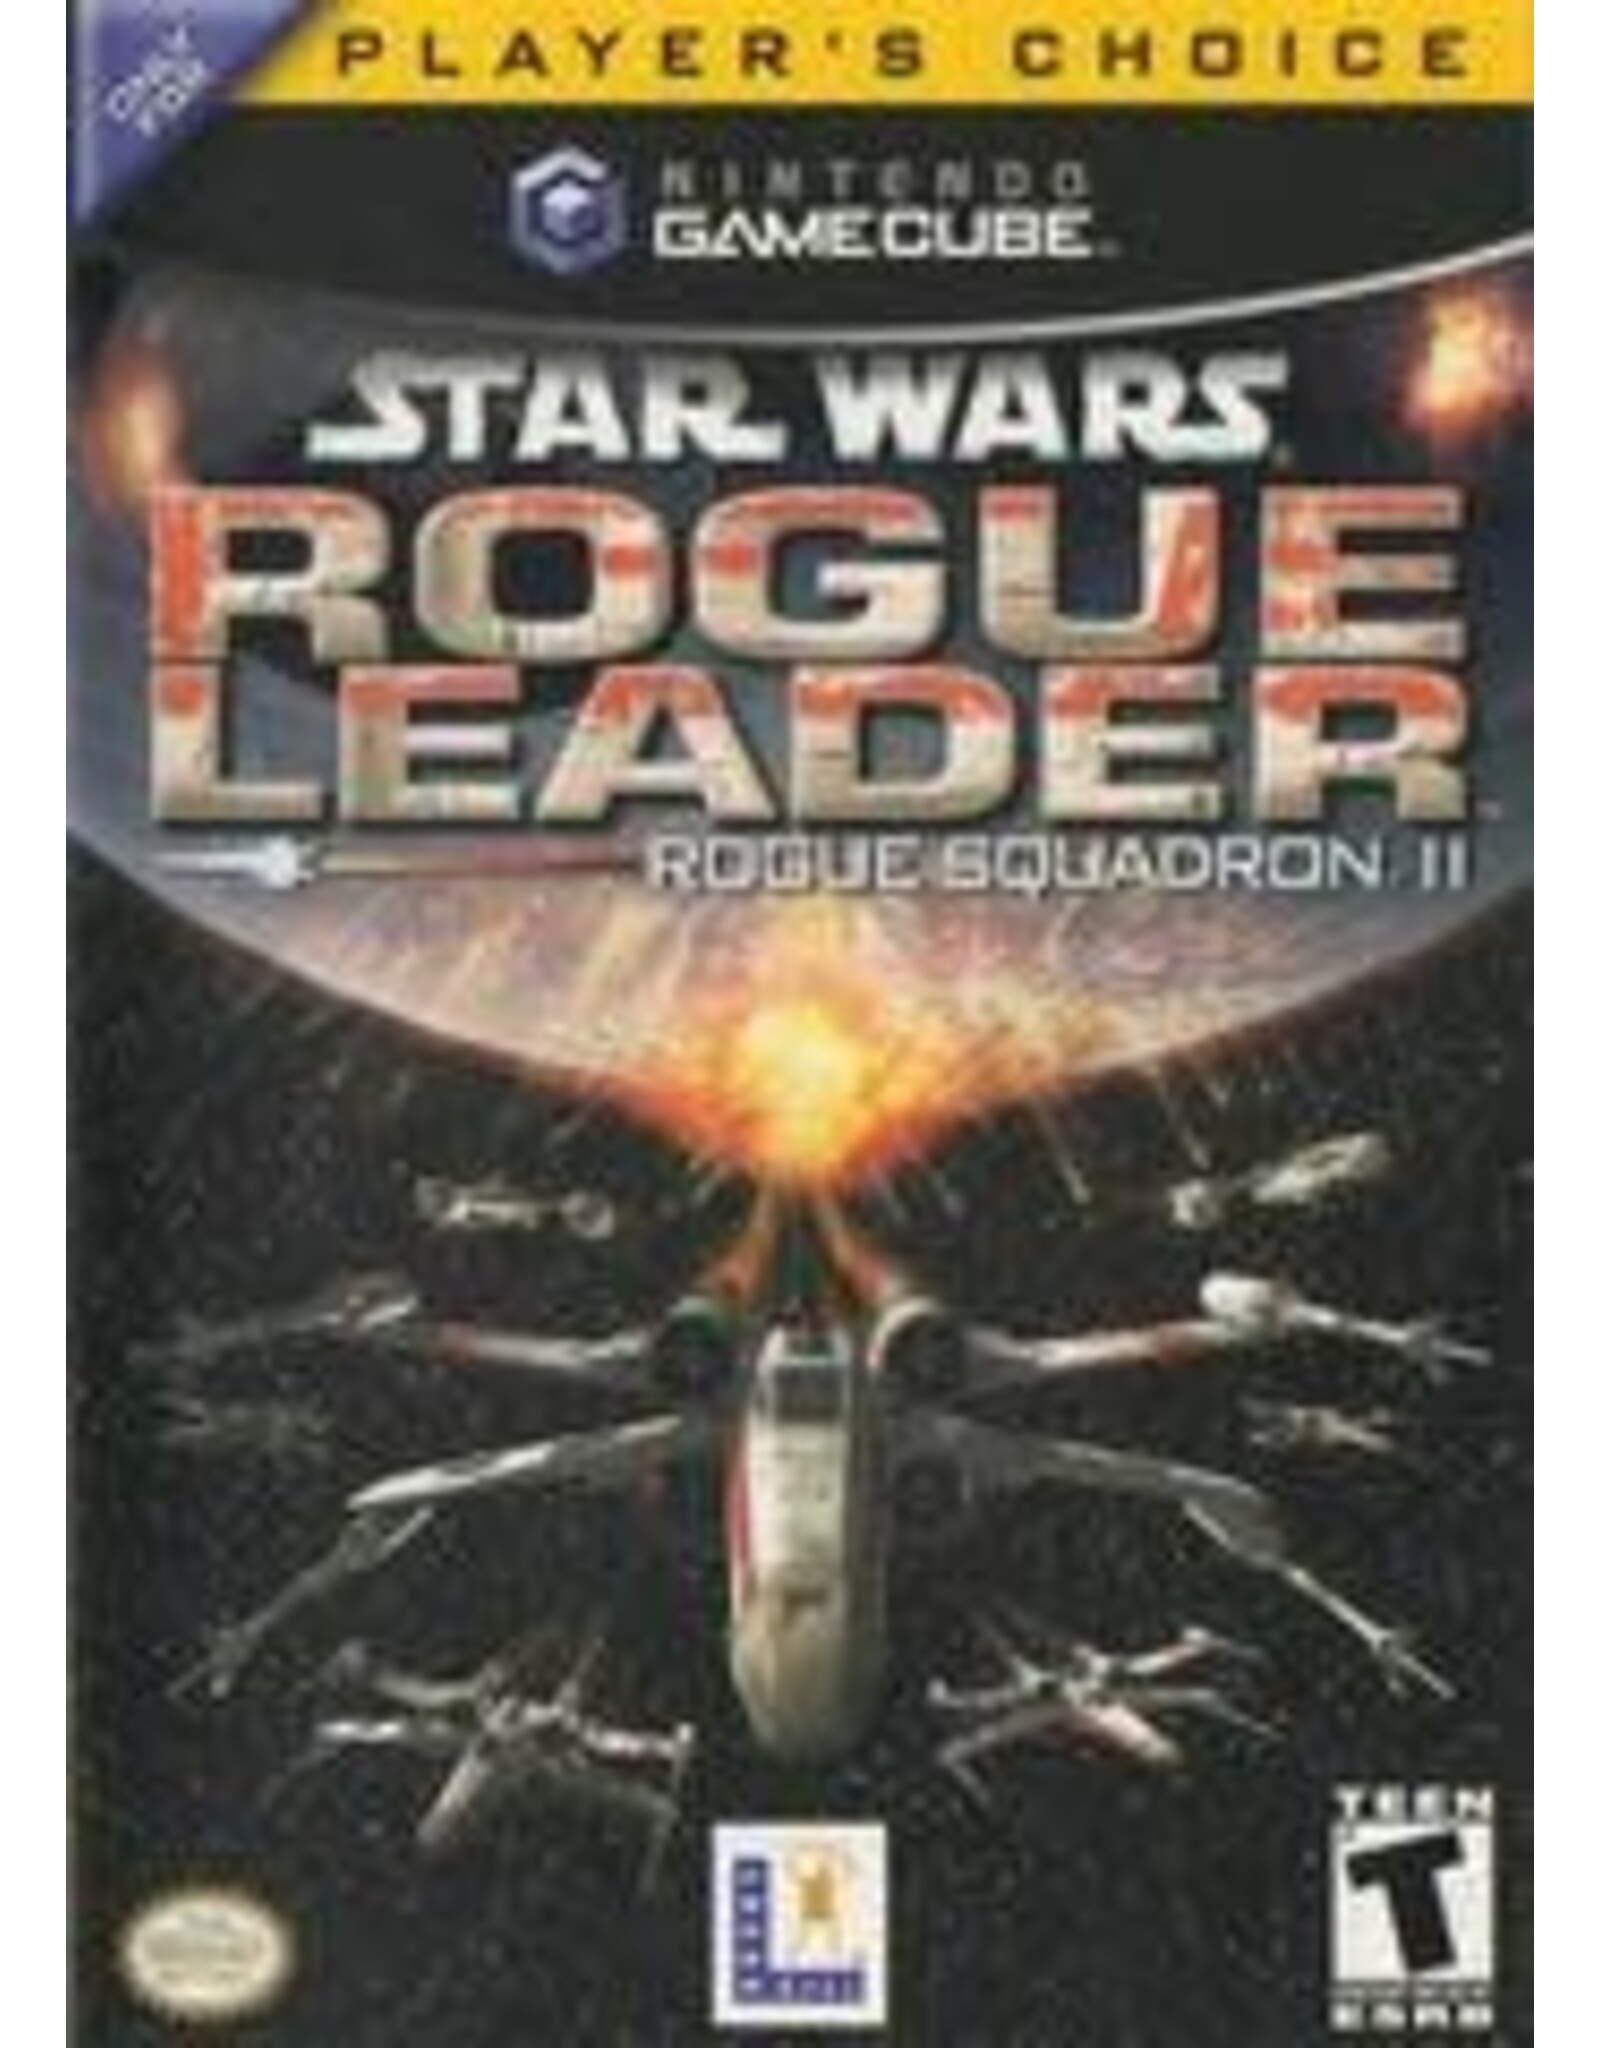 Gamecube Star Wars Rogue Leader - Player's Choice (Used, No Manual)